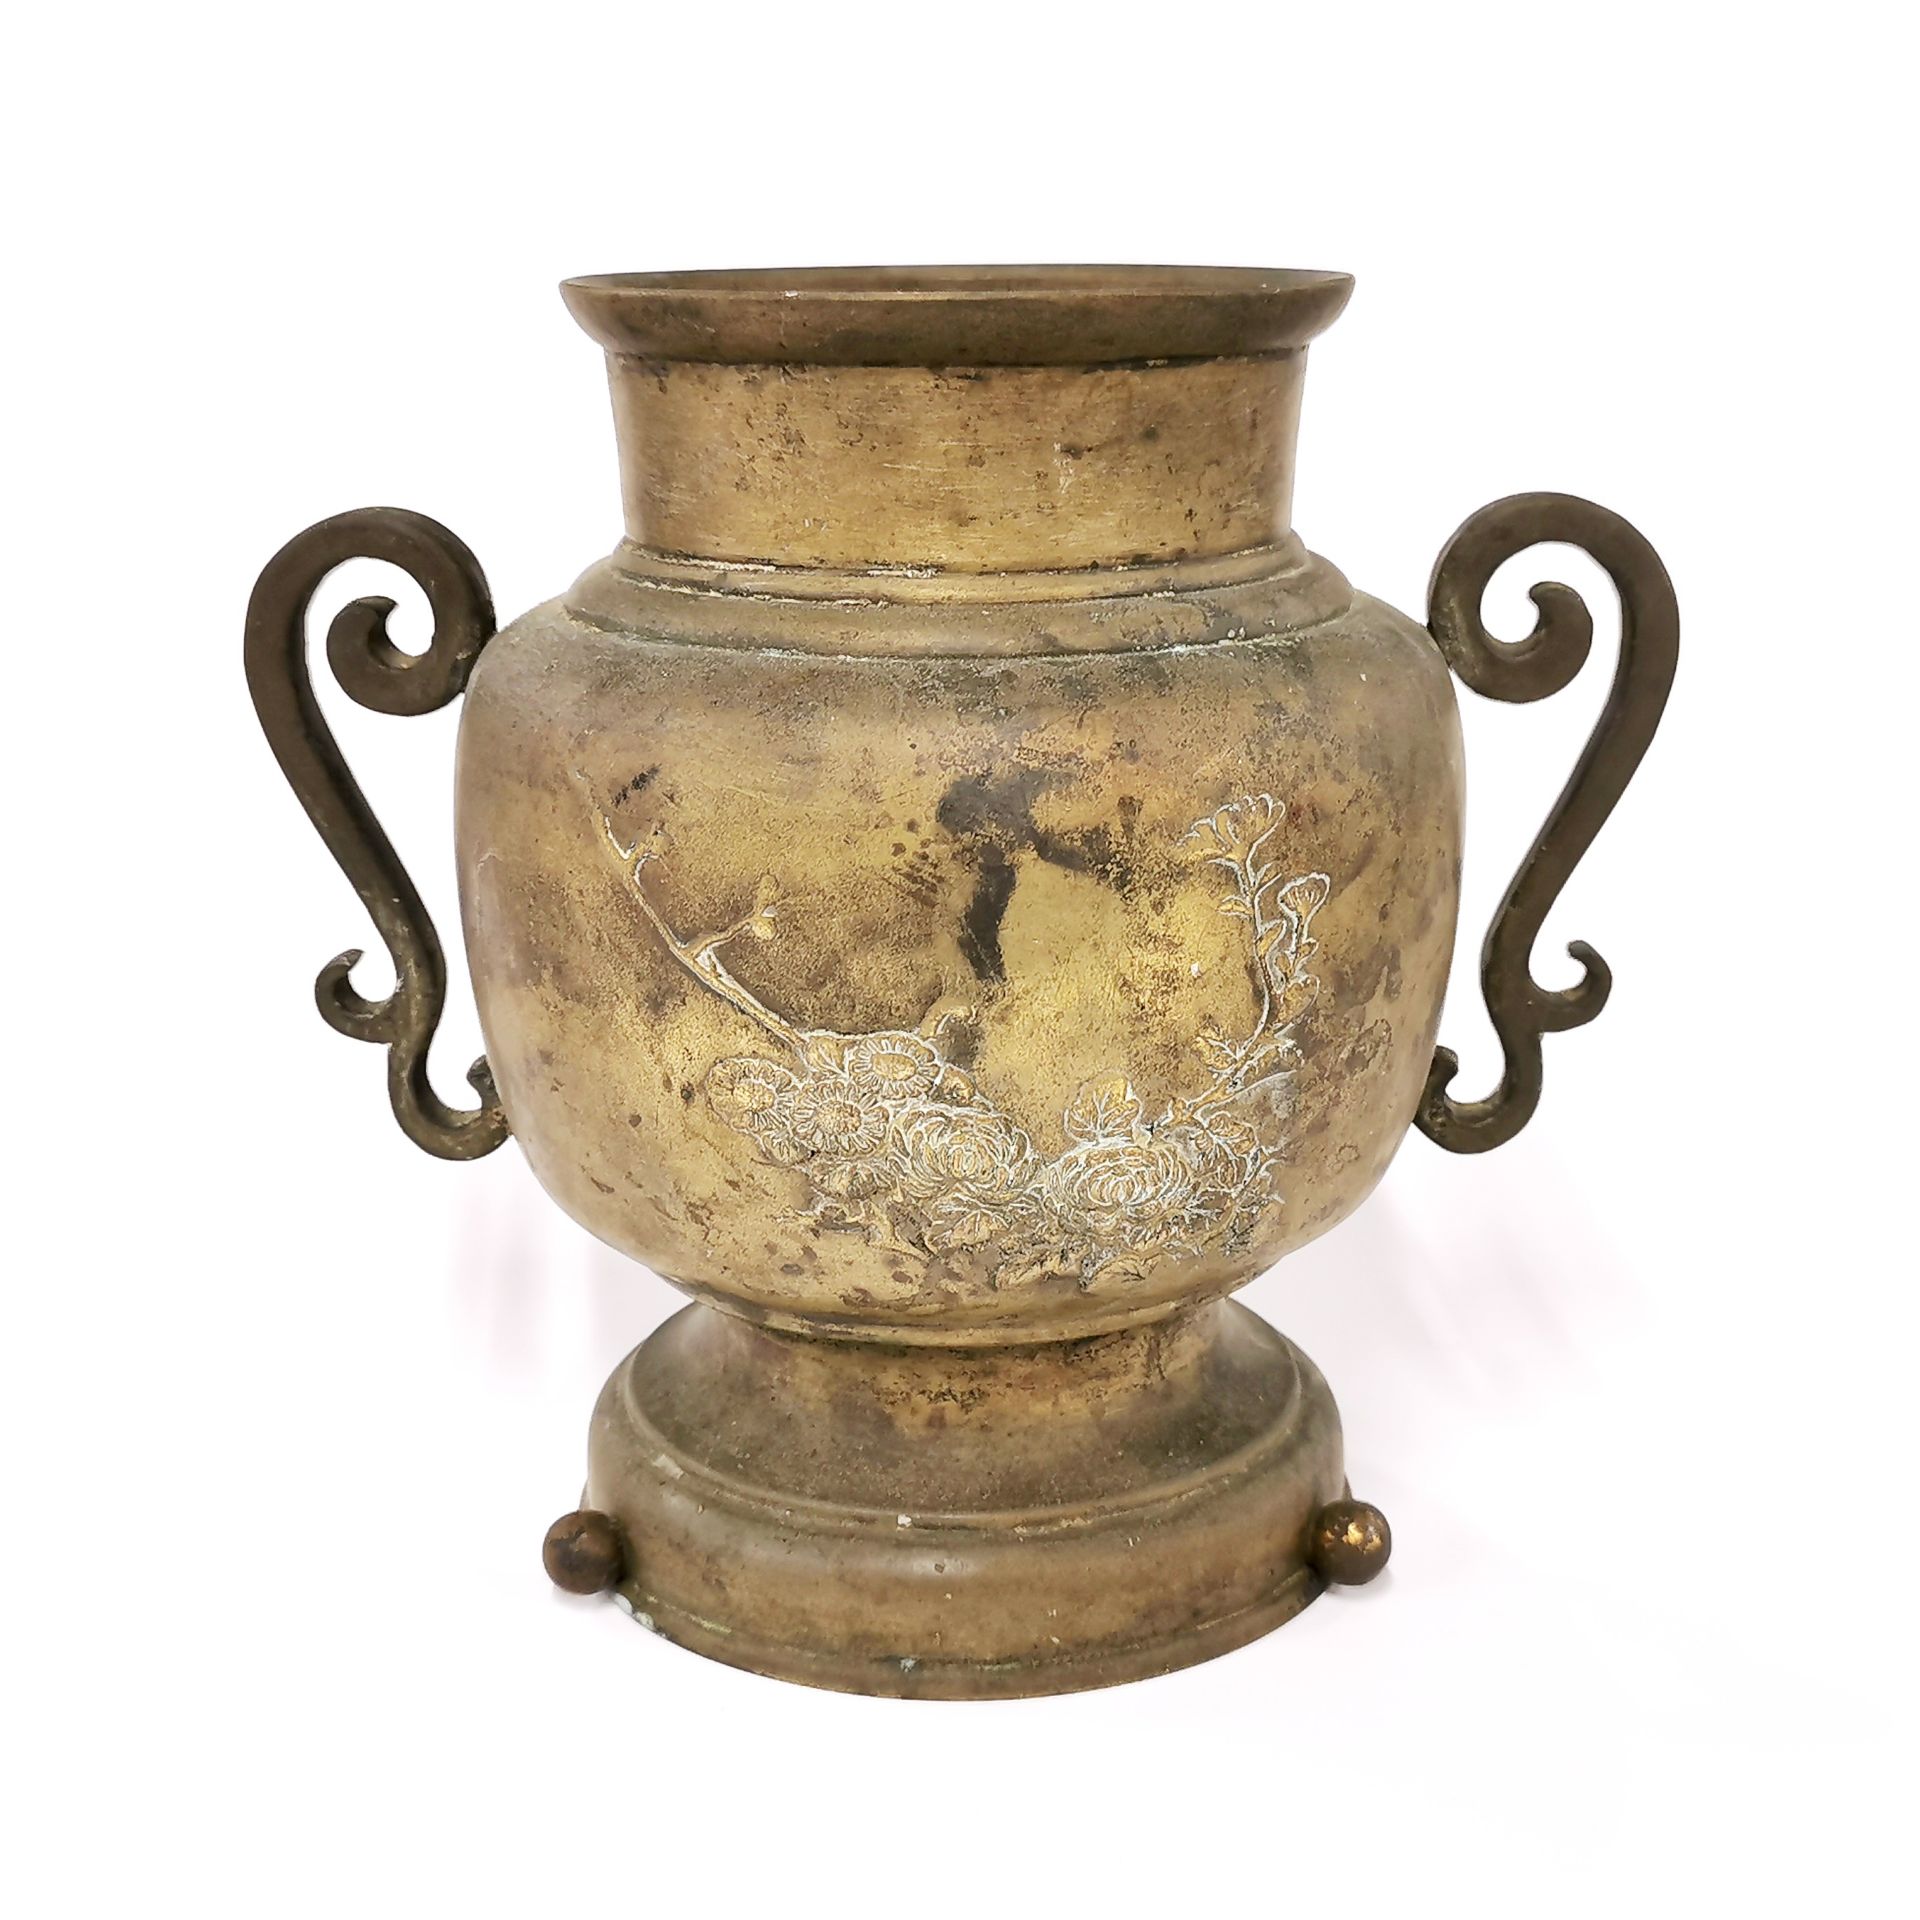 An early 20th C Chinese bronze/brass two handled vase, H. 19cm.